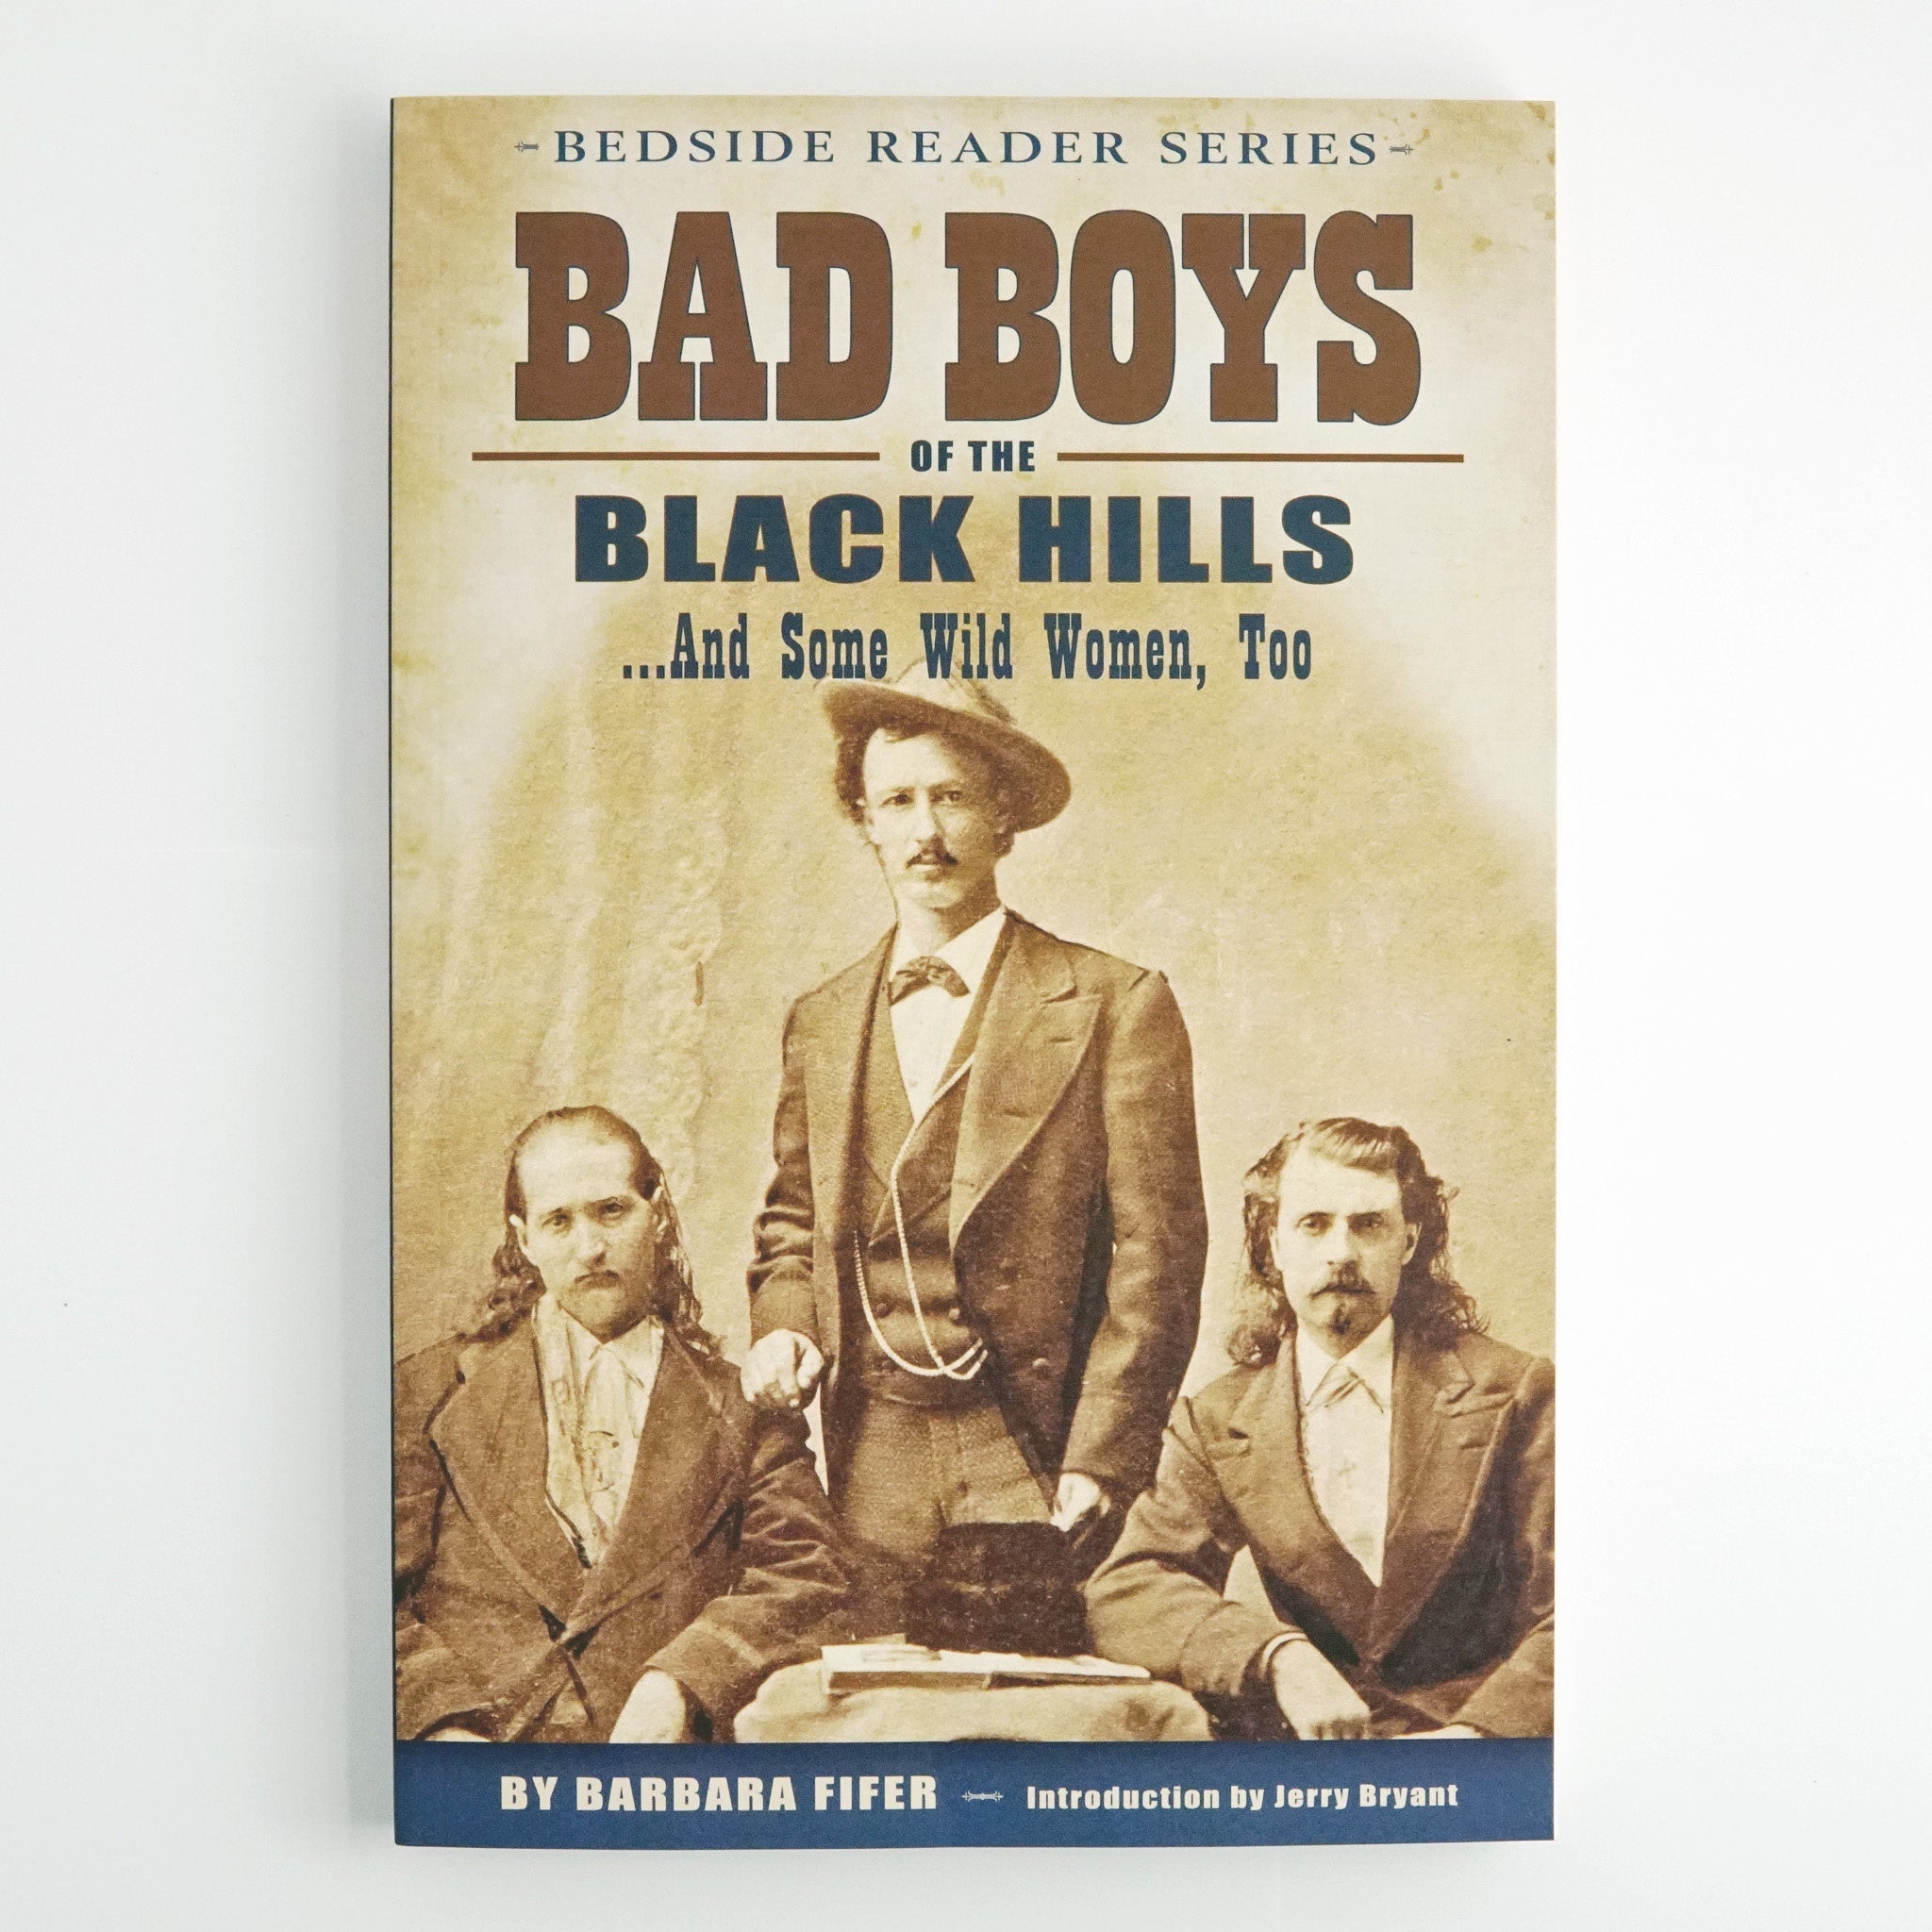 BK 8 BAD BOYS OF THE BLACK HILLS...AND SOME WILD WOMEN, TOO BY BARBARA FIFER #21032823 D2 MAR24